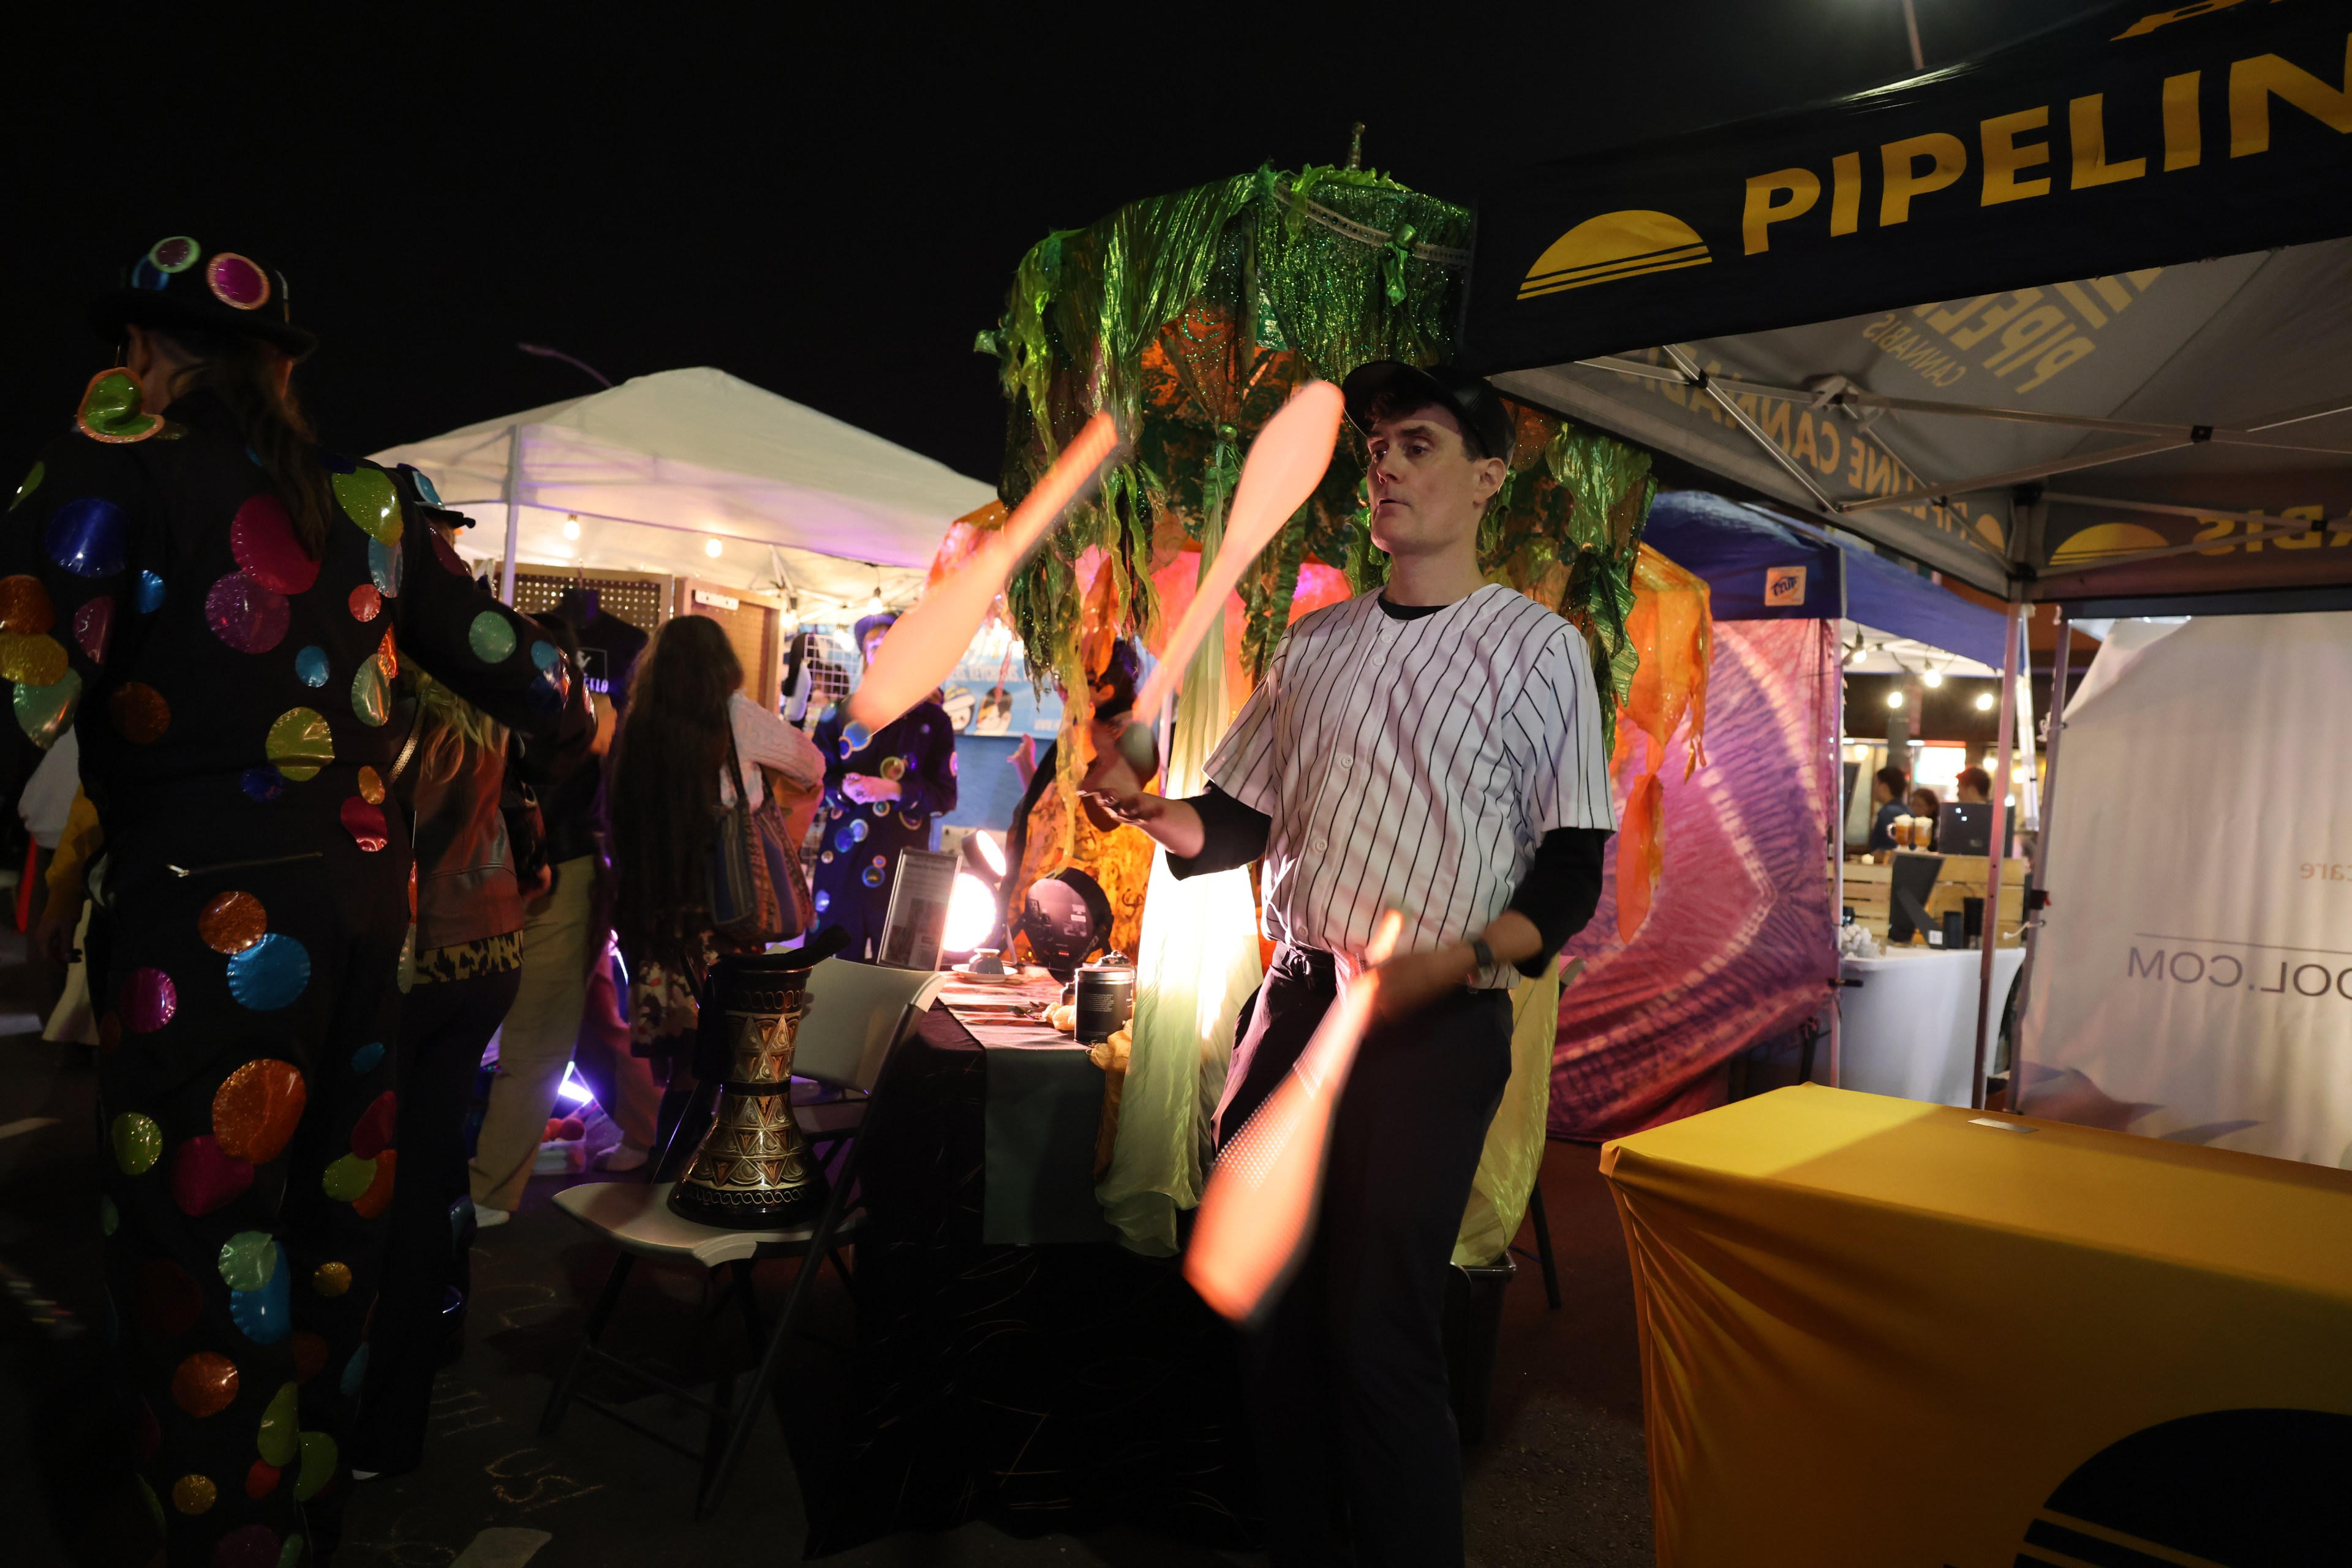 A person juggles clubs at a vibrant outdoor market with colorful tents and festive attire.